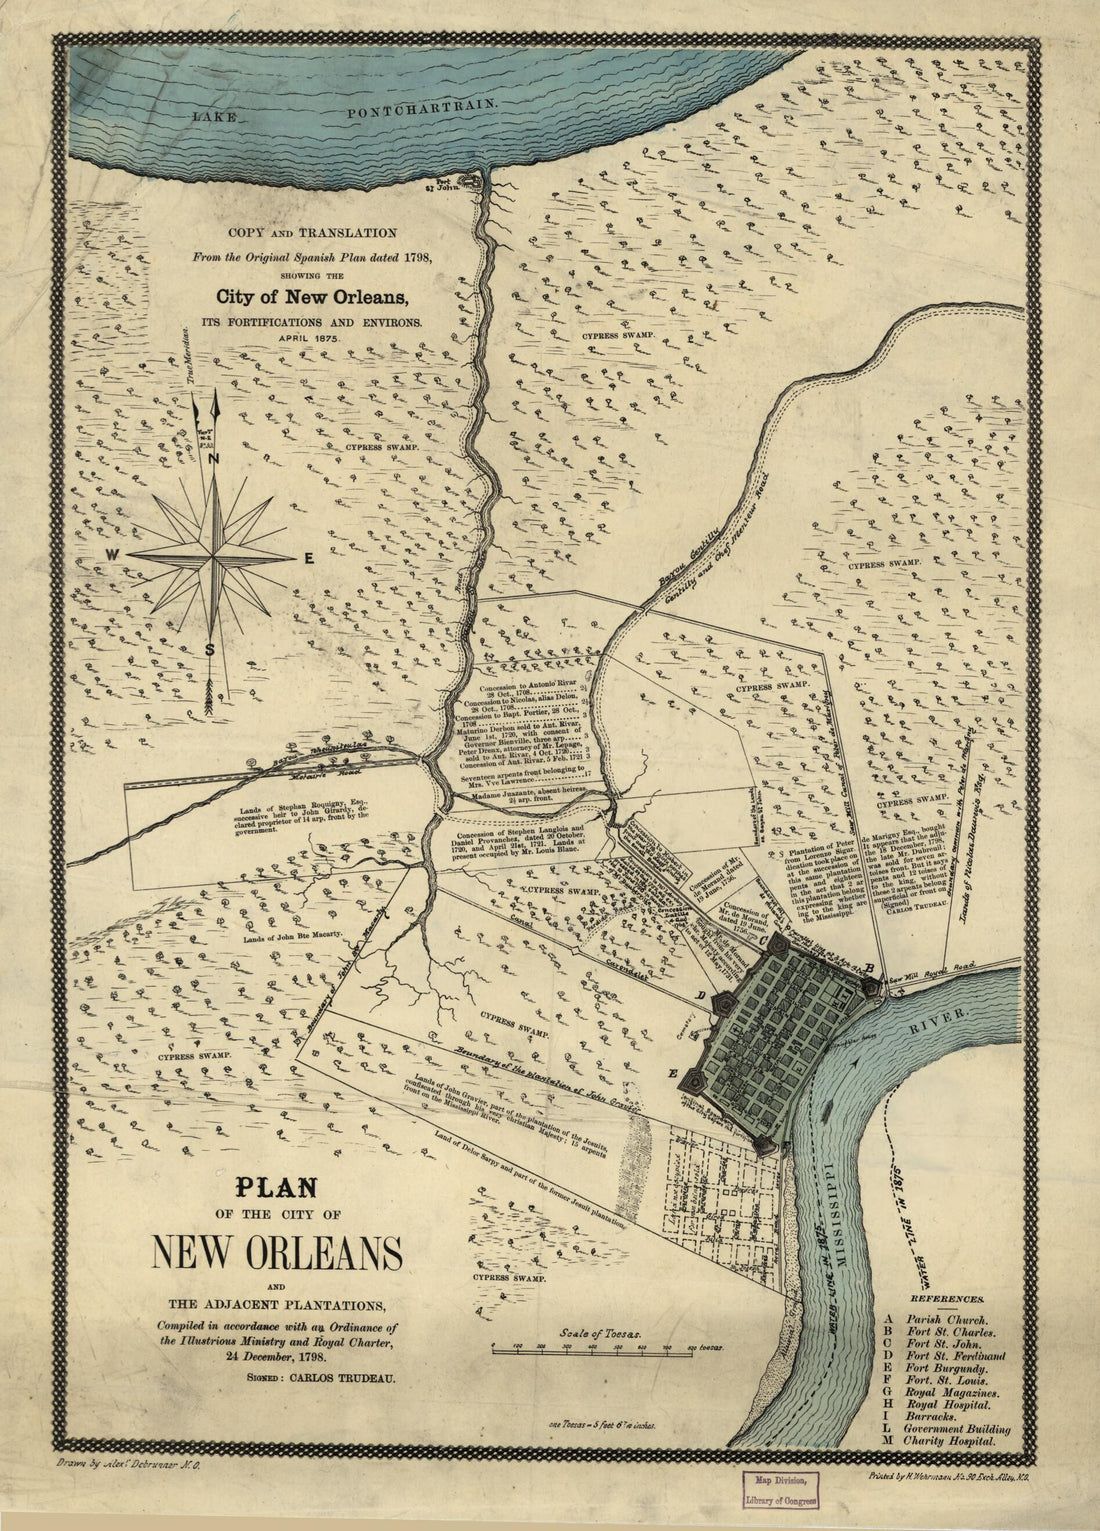 This old map of Plan of the City of New Orleans and Adjacent Plantations from 1875 was created by Alexander Debrunner, Charles Laveau Trudeau in 1875